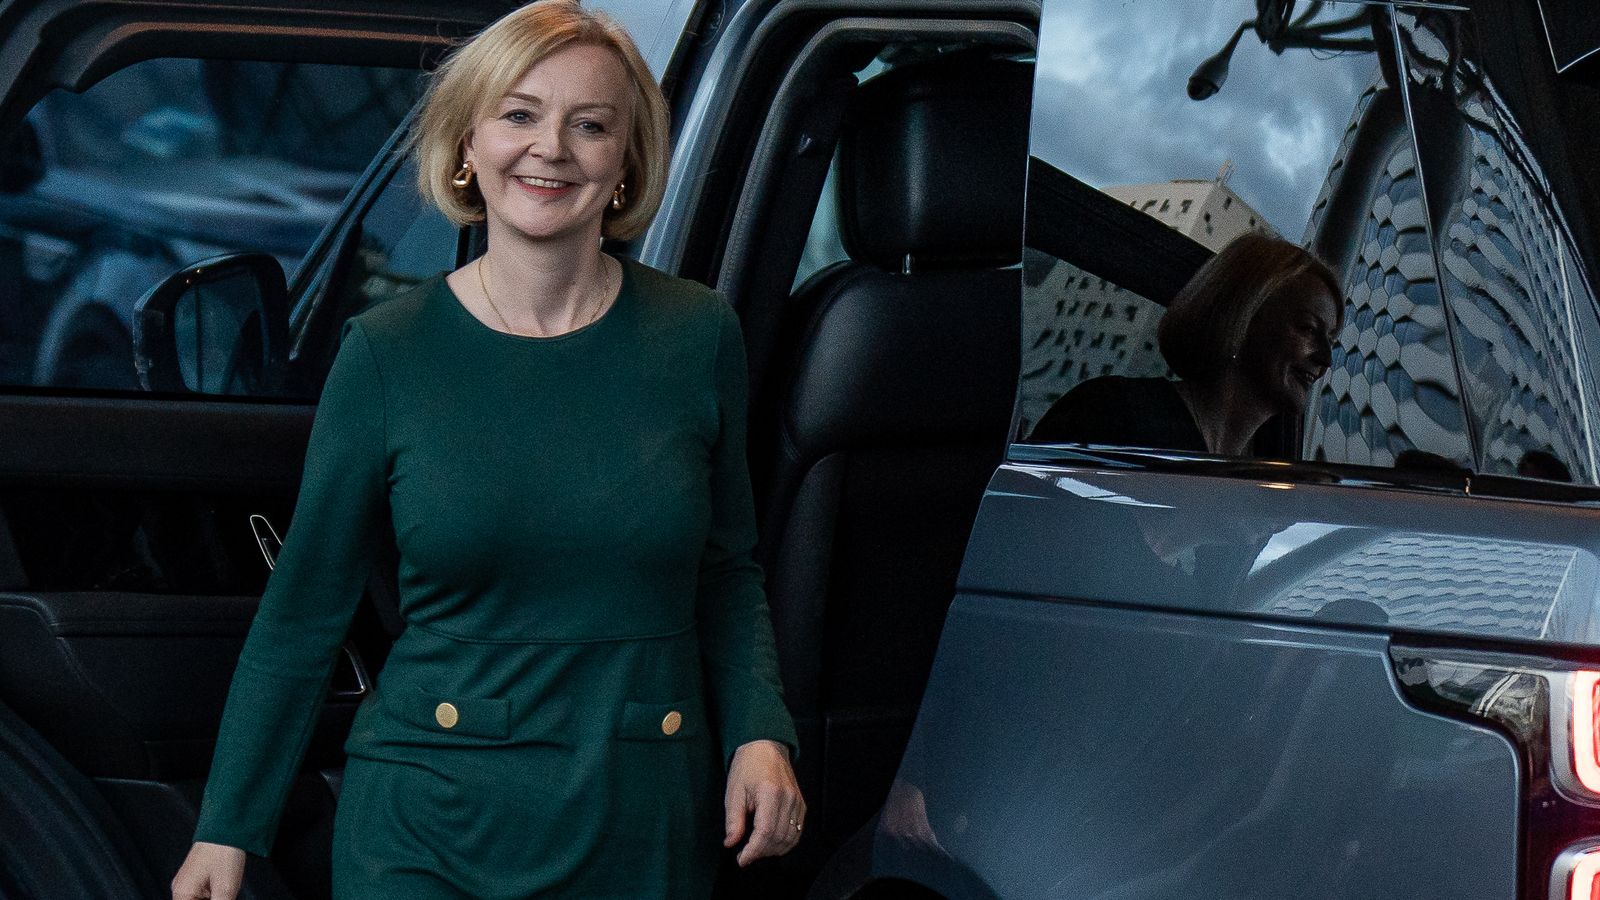 Liz Truss insists she is right 'to do things differently' - amid reports chancellor attended champagne party